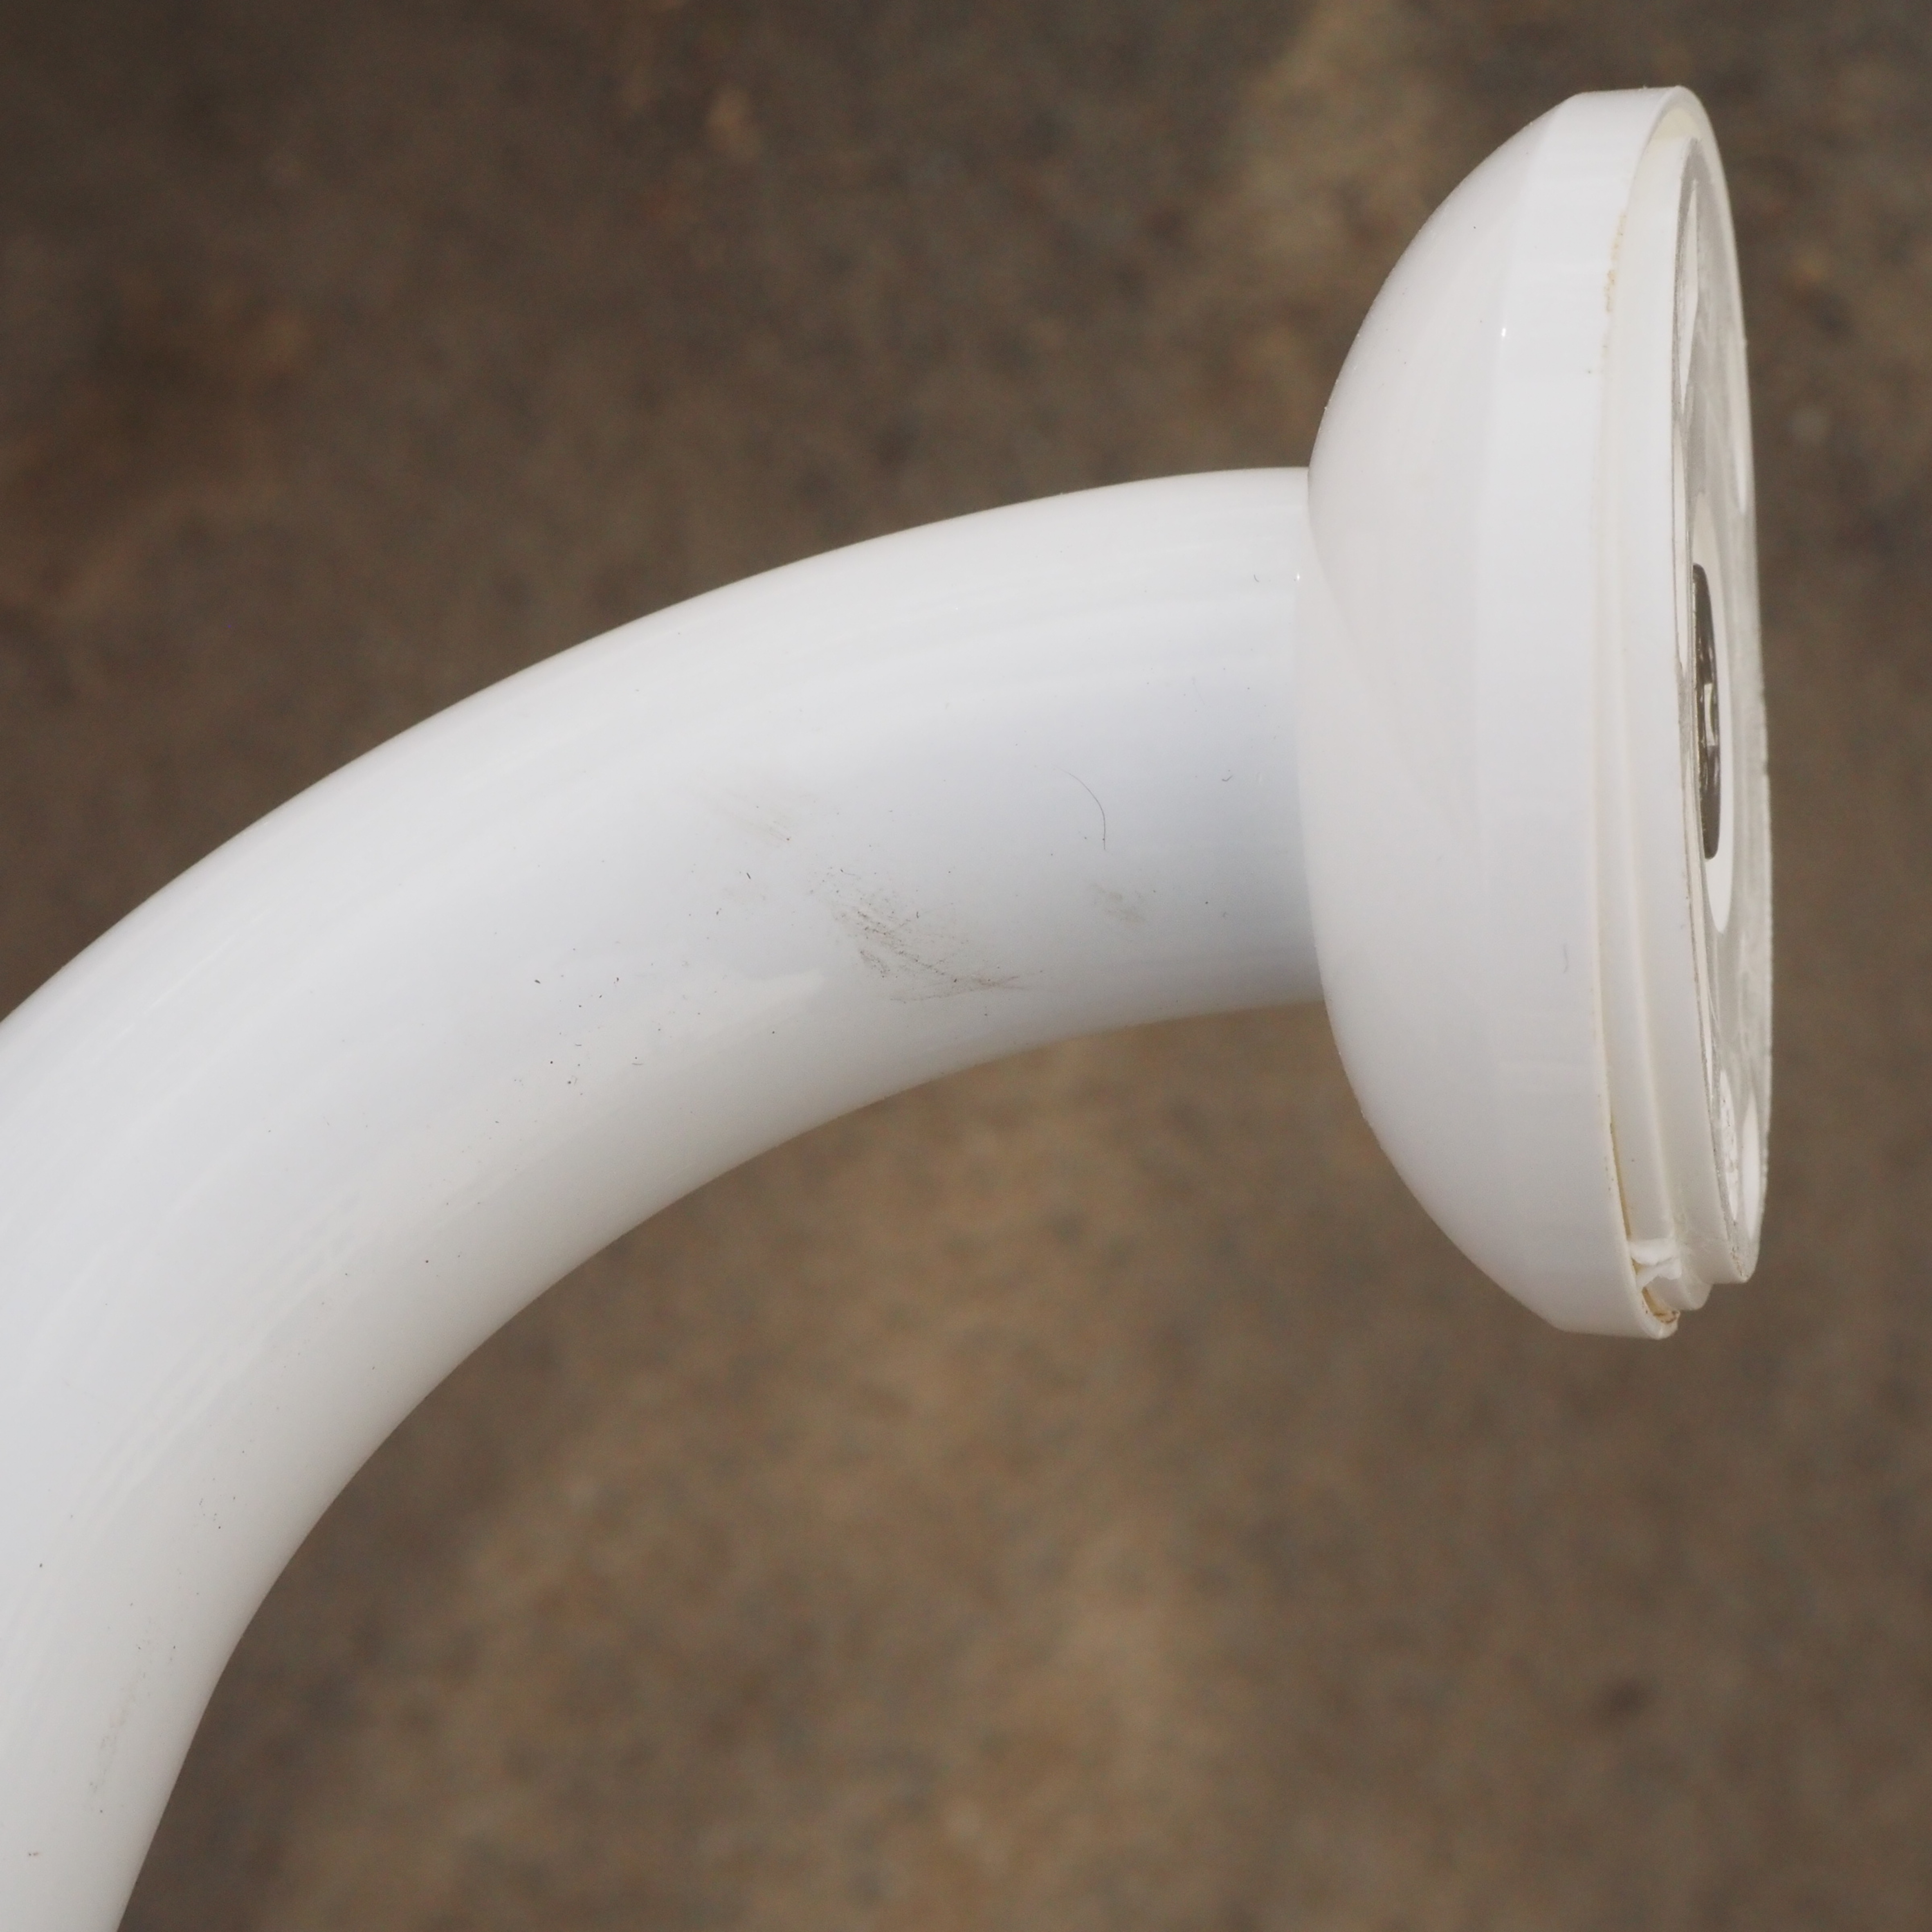 Grab bar in ABS with rosettes